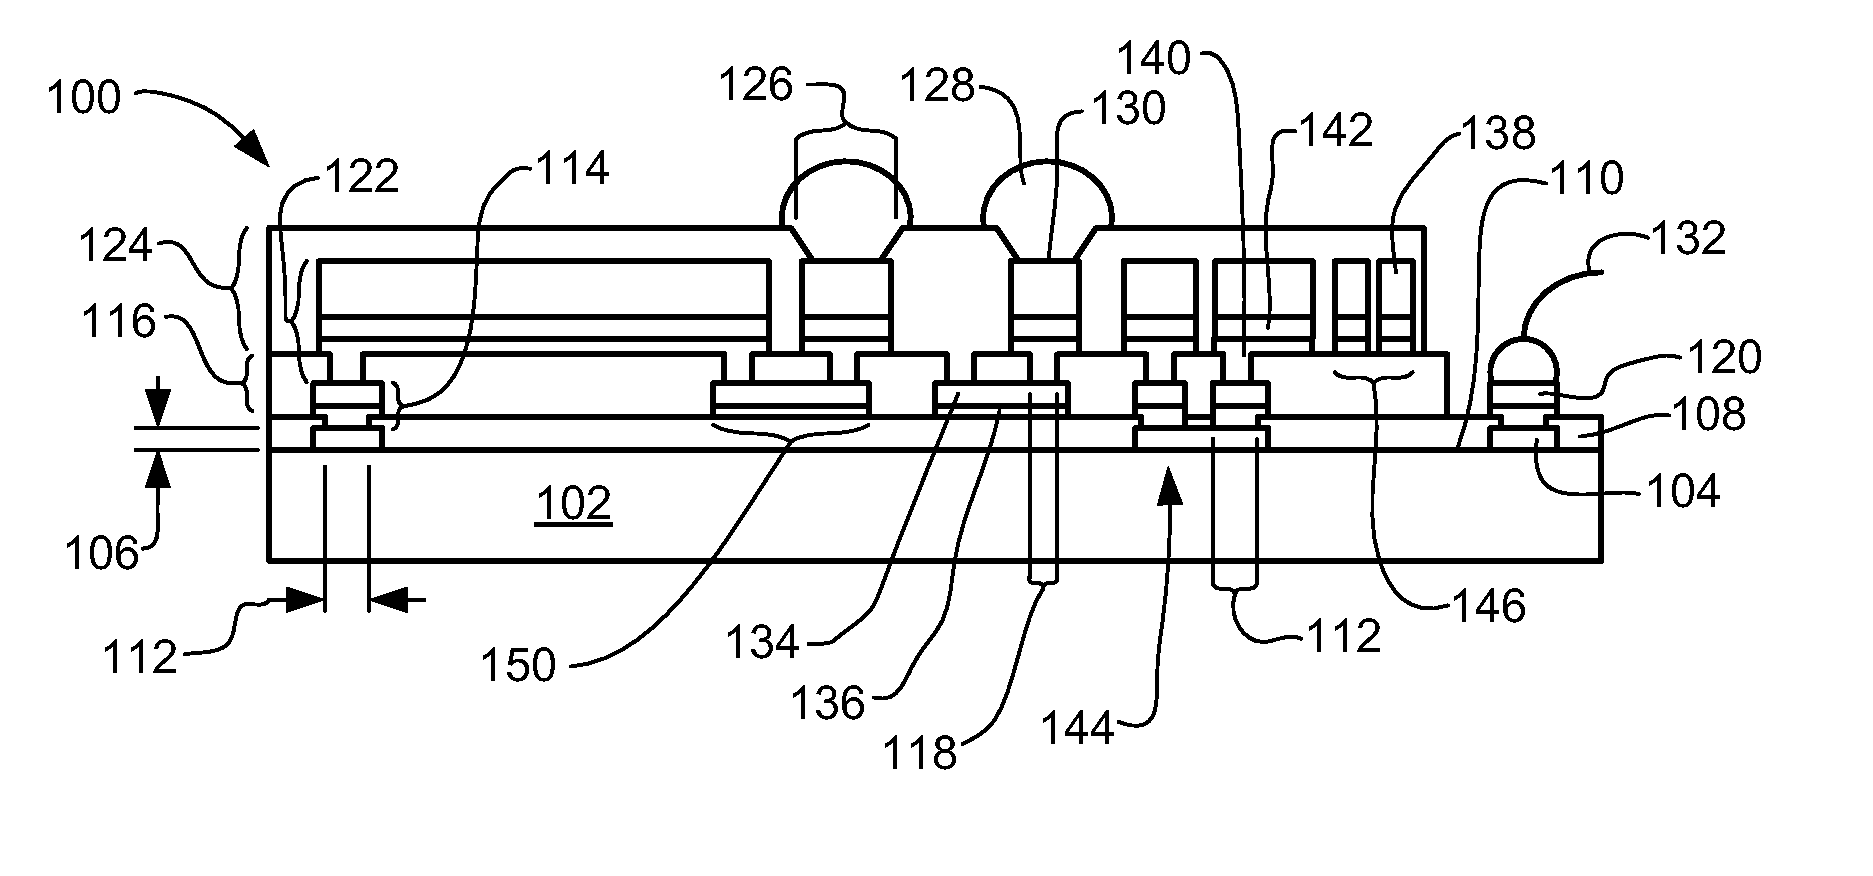 Integrated circuit package system with post-passivation interconnection and integration